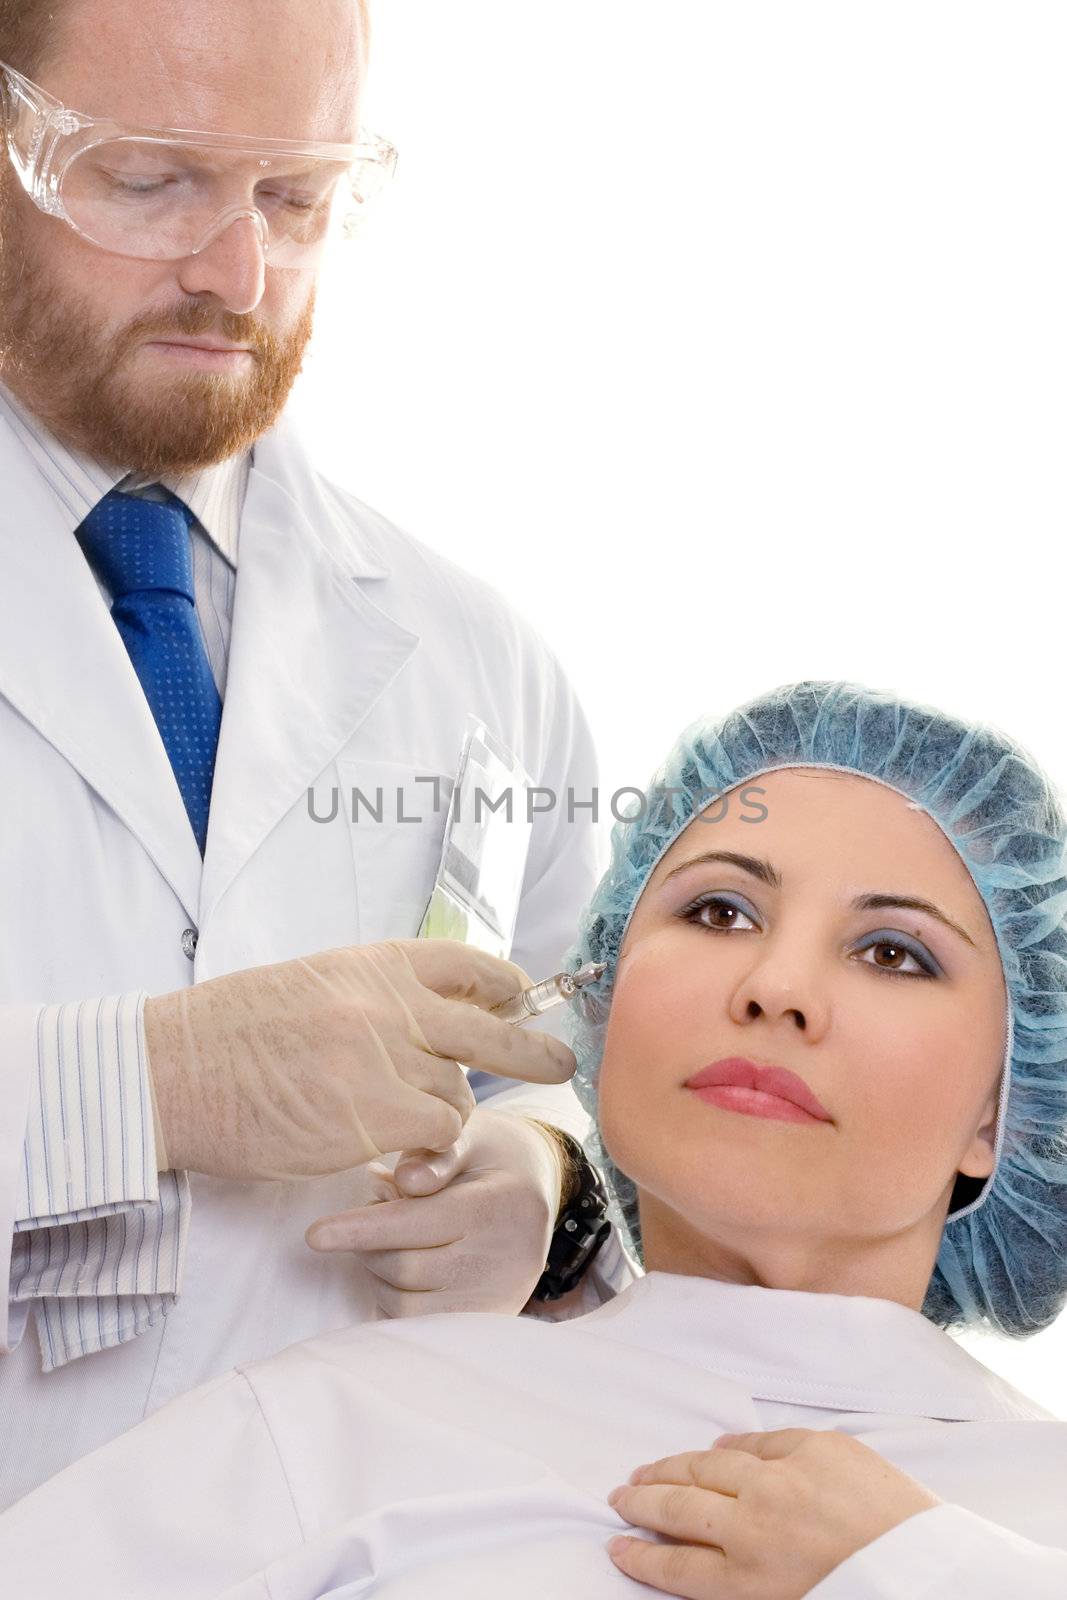 Botox�, is a popular non-surgical injection that temporarily reduces or eliminates frown lines, forehead creases, crows feet near the eyes and thick bands in the neck. The toxin blocks the nerve impulses, temporarily paralyzing the muscles that cause wrinkles while giving the skin a smoother, more refreshed appearance. 